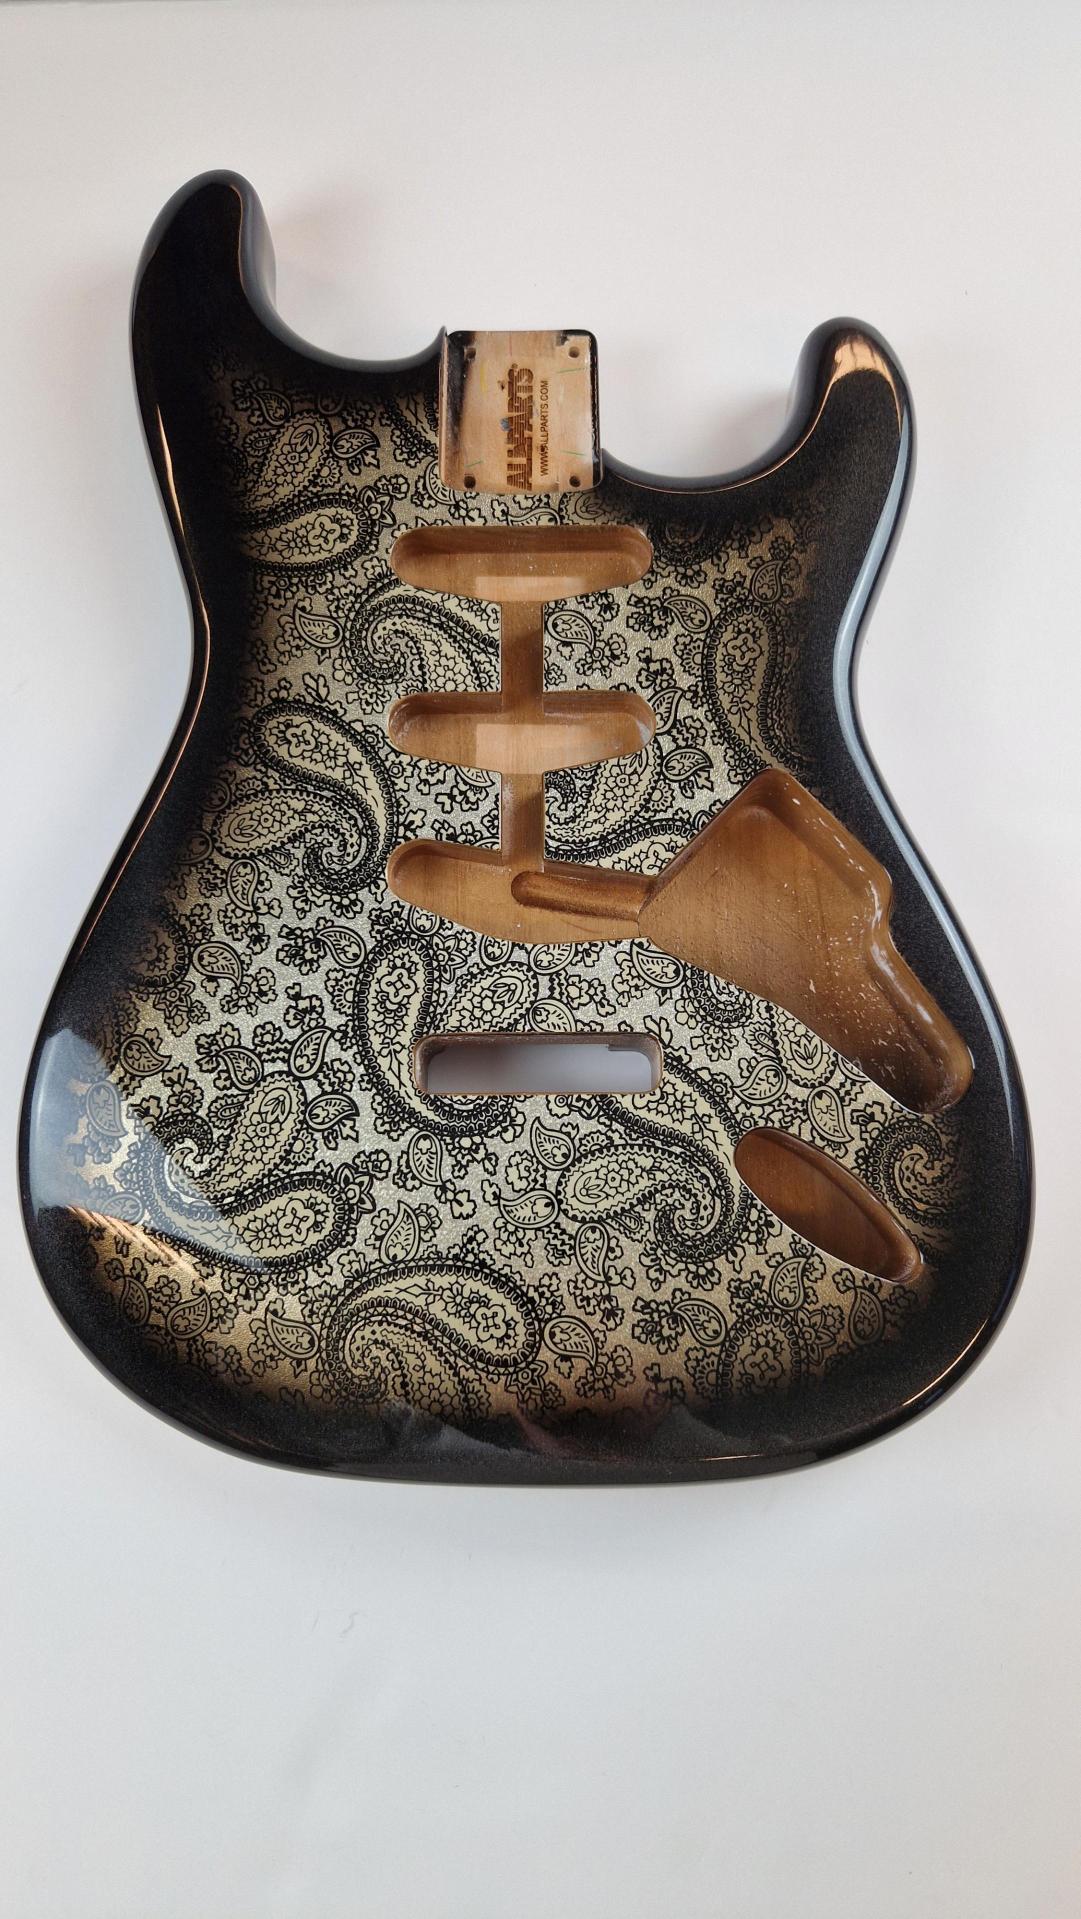 Strat Replacement Body with Polyurethane Finish - Black Paisley